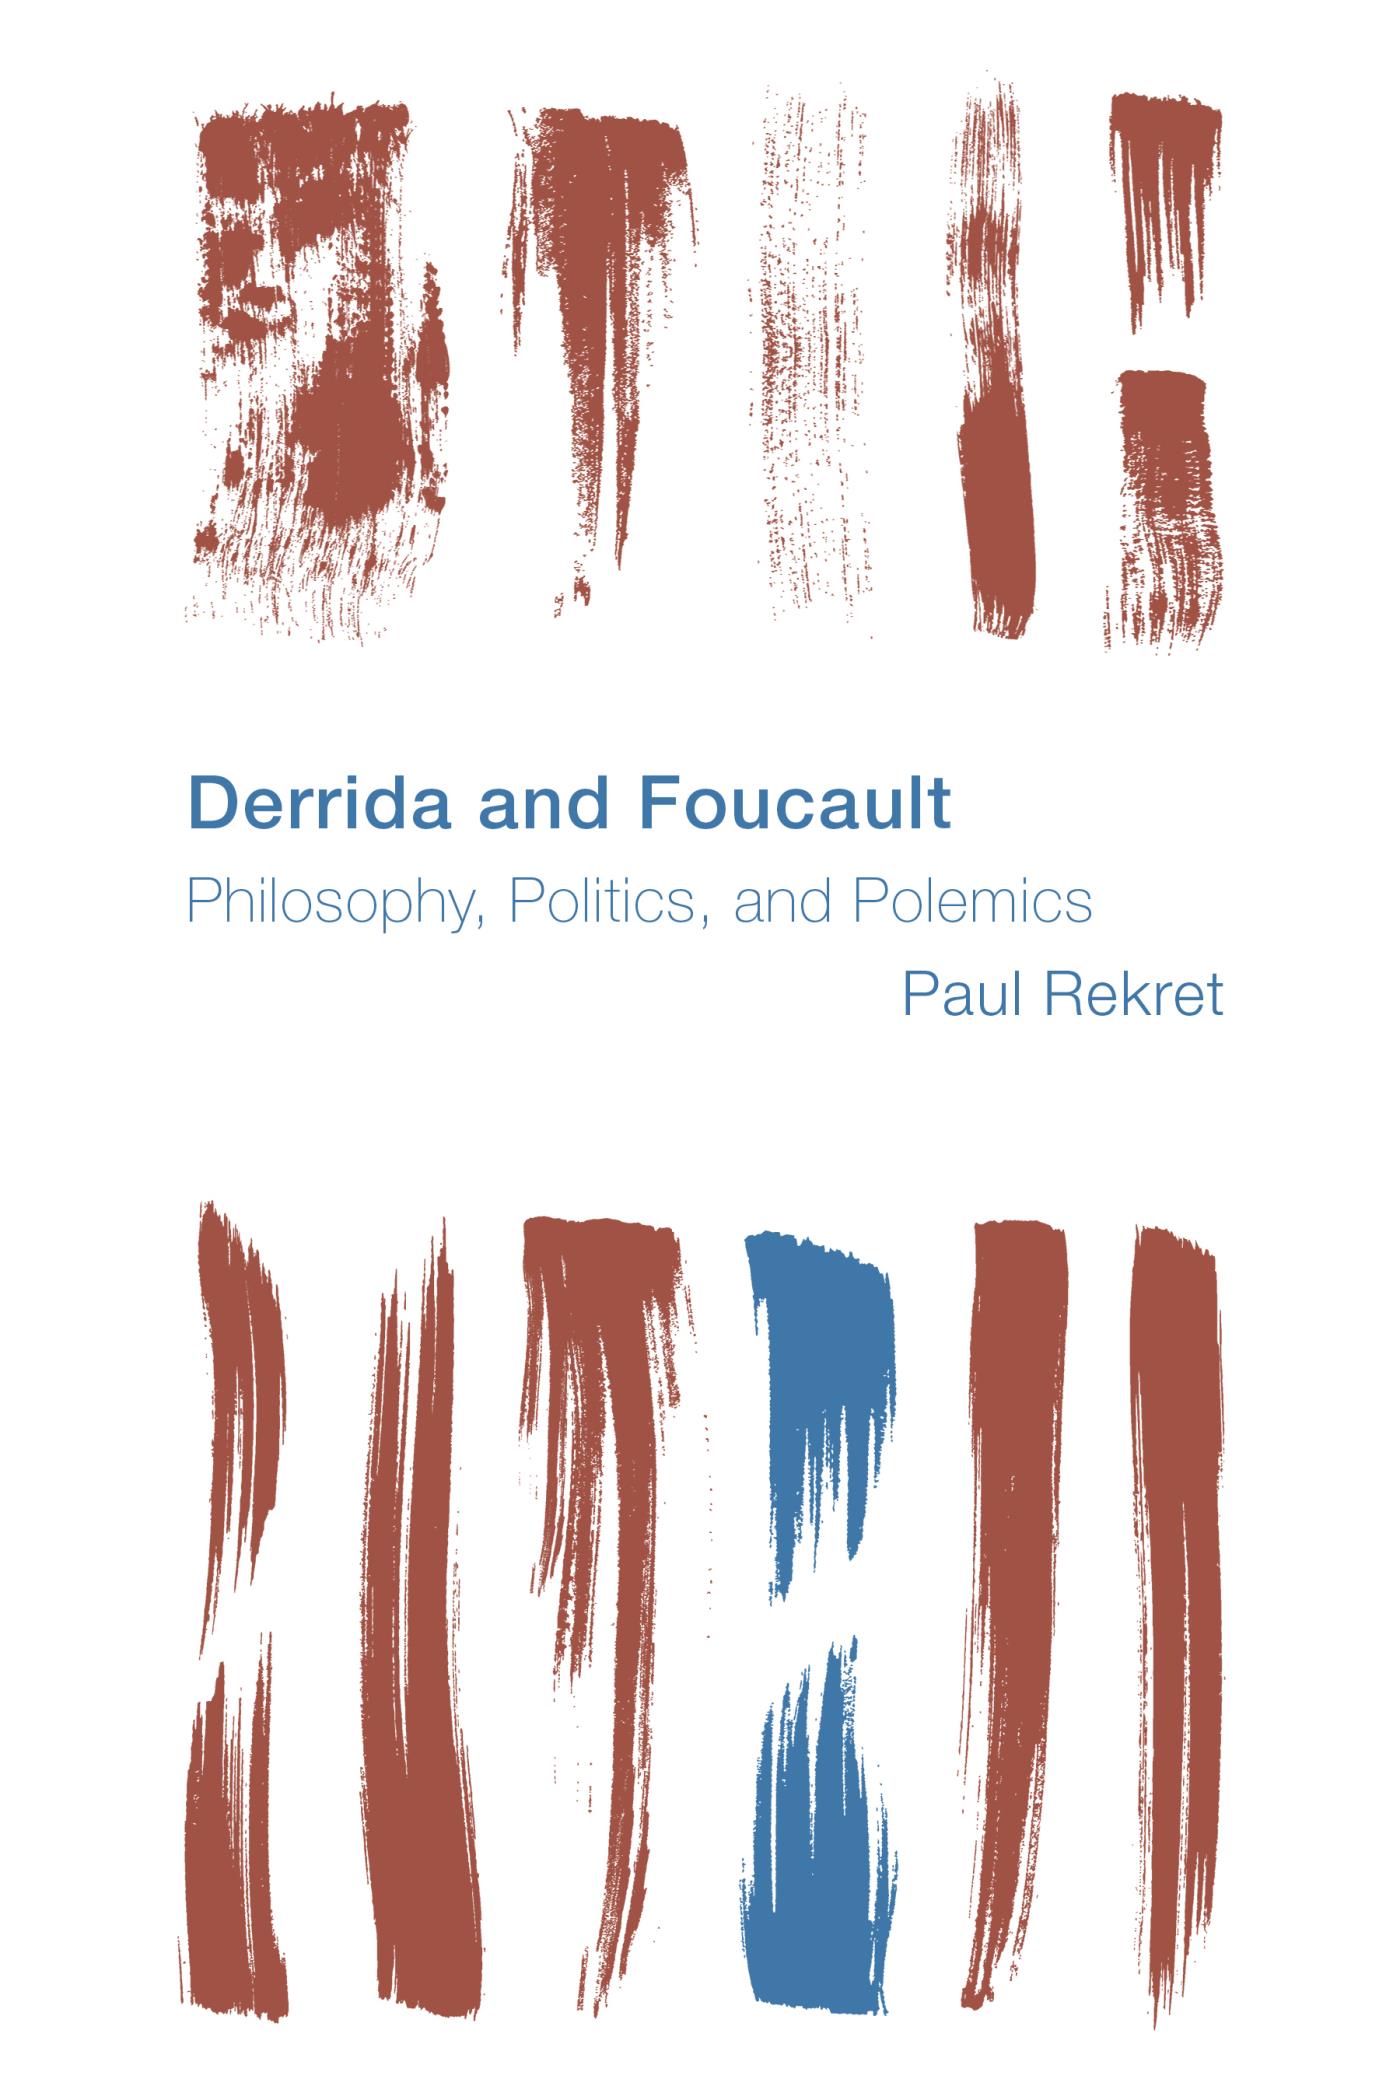 This image depicts a book cover for a book about the philosophical and political debates between Jacques Derrida and Michel Foucault. Full Text: Derrida and Foucault Philosophy, Politics, and Polemics Paul Rekret